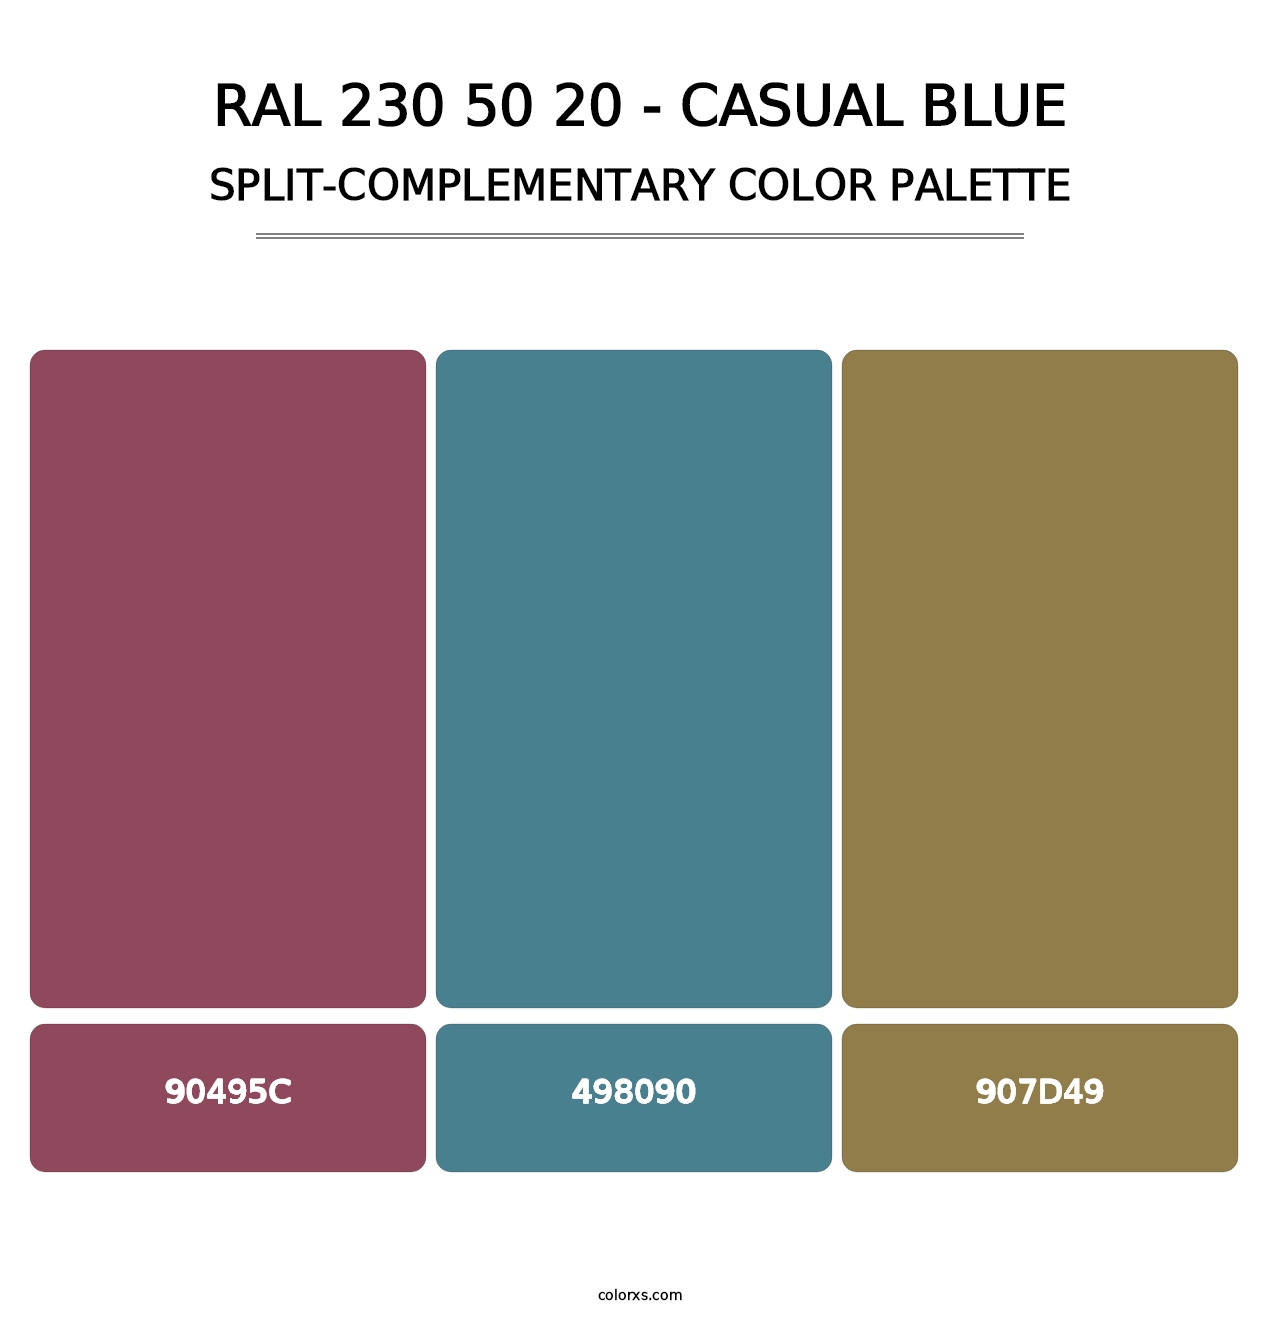 RAL 230 50 20 - Casual Blue - Split-Complementary Color Palette